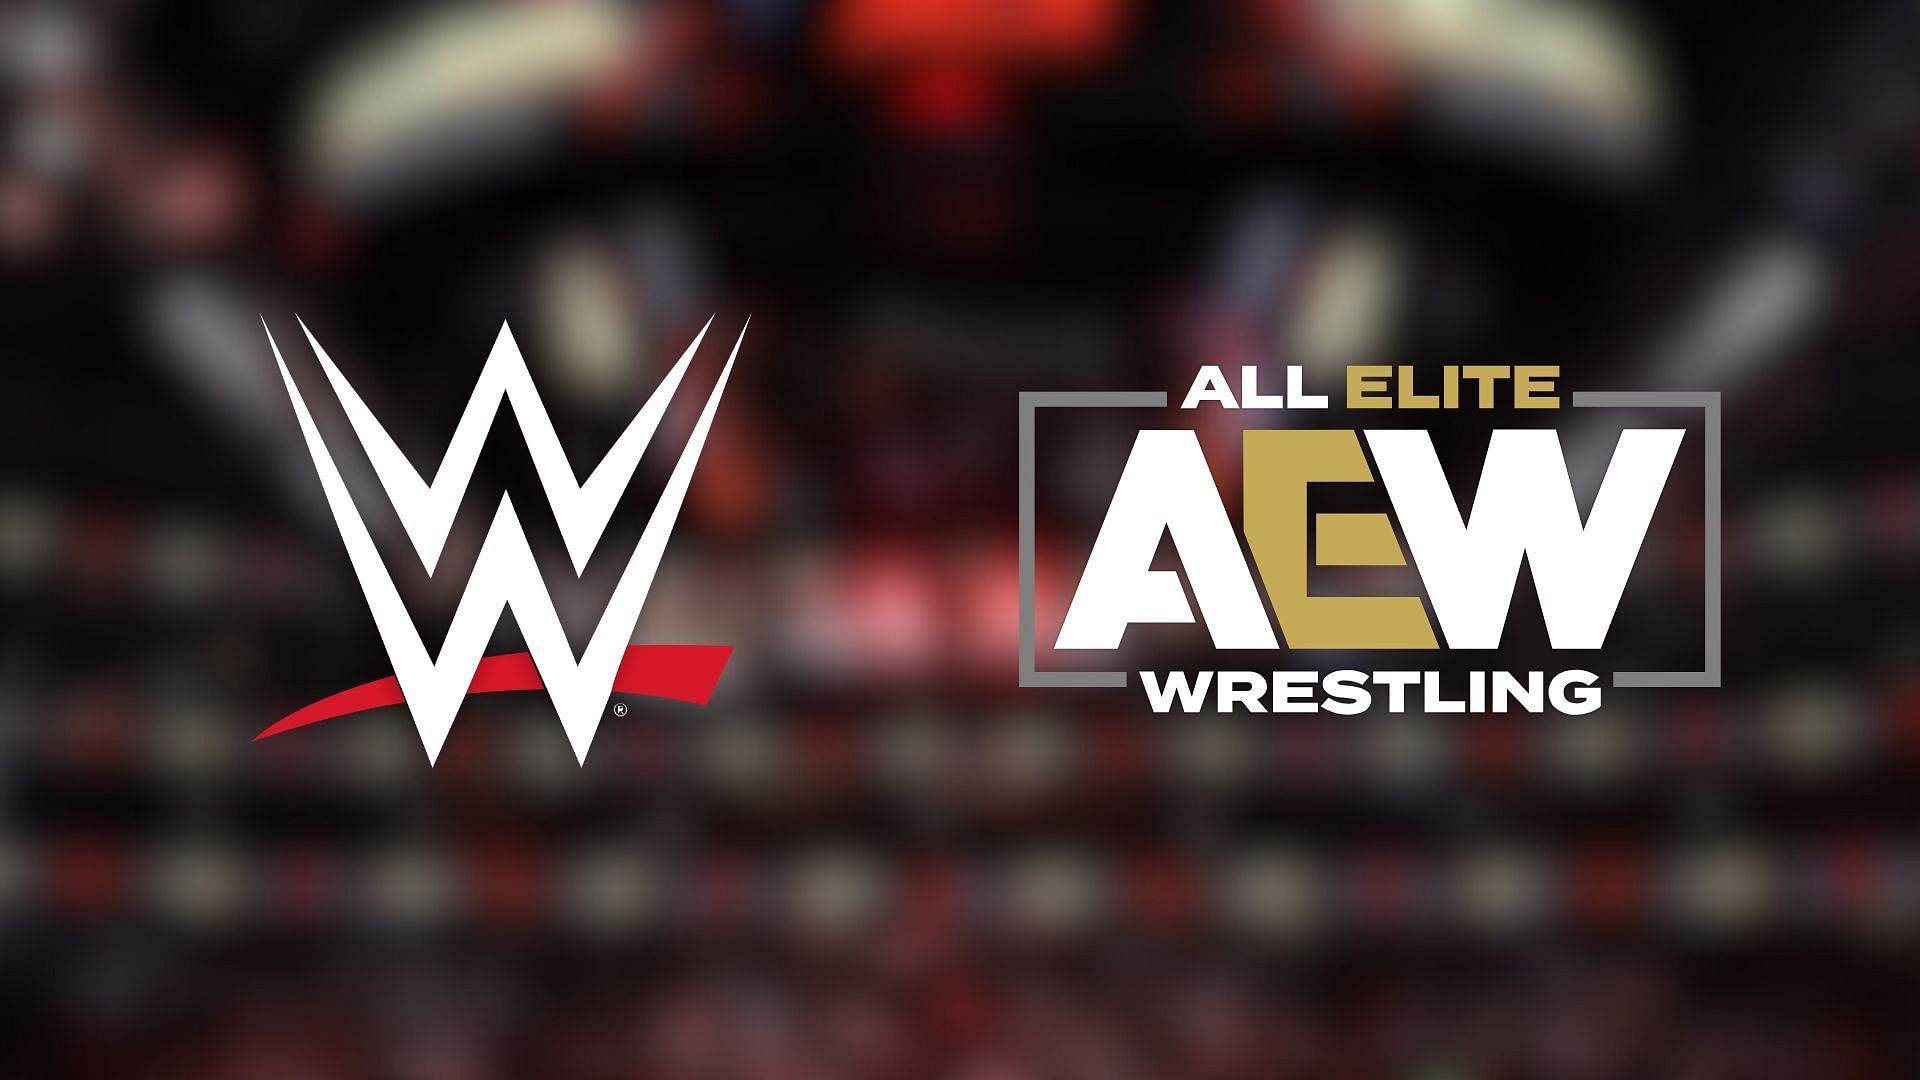 Will a former WWE Superstar return to AEW this week?